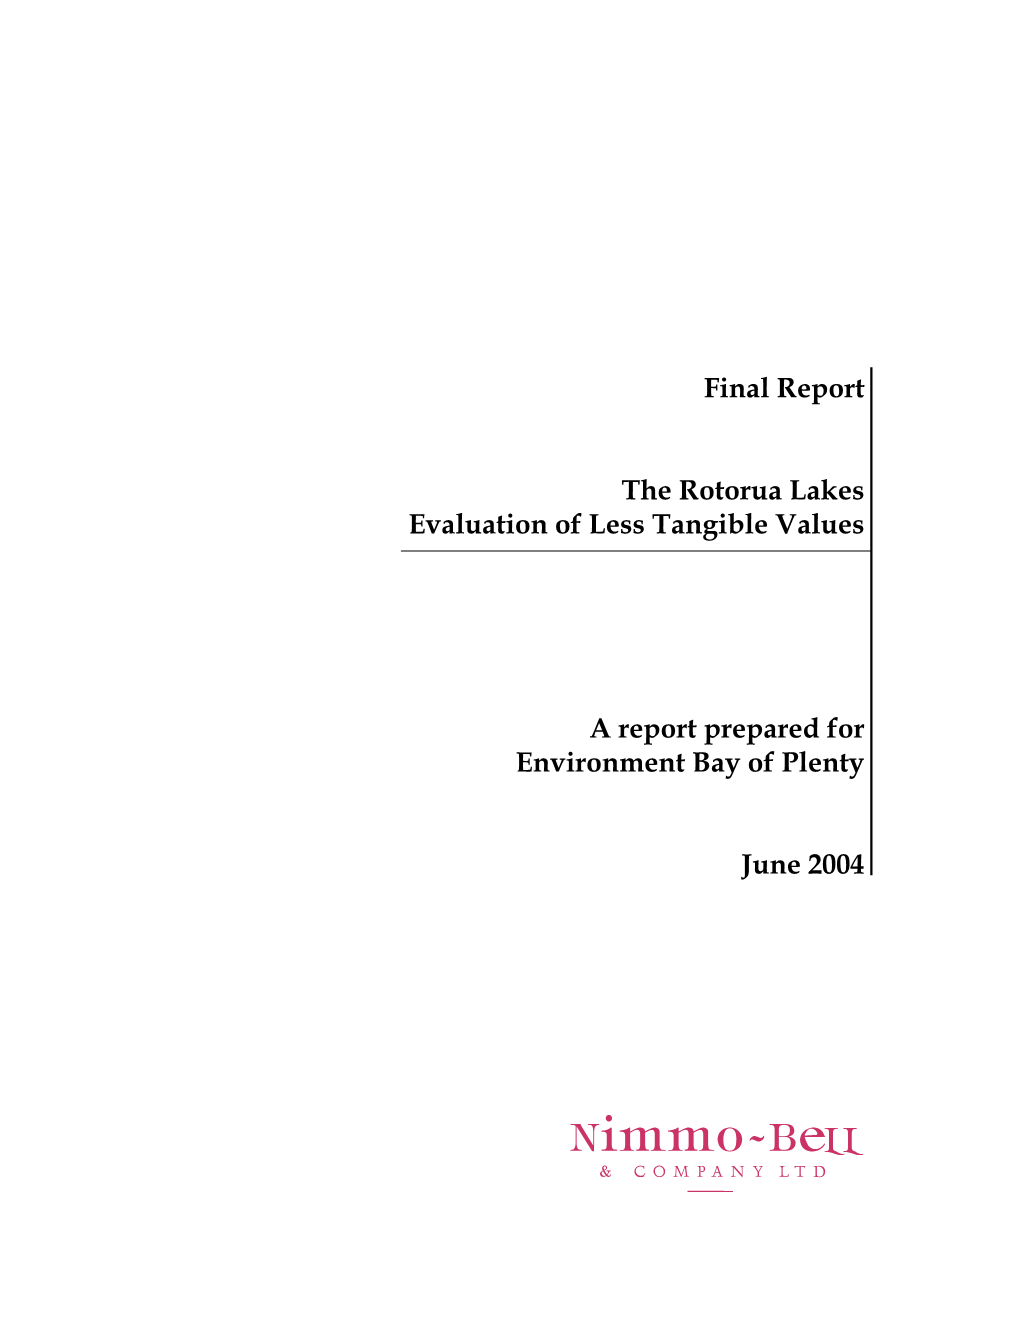 Final Report the Rotorua Lakes Evaluation of Less Tangible Values a Report Prepared for Environment Bay of Plenty June 2004